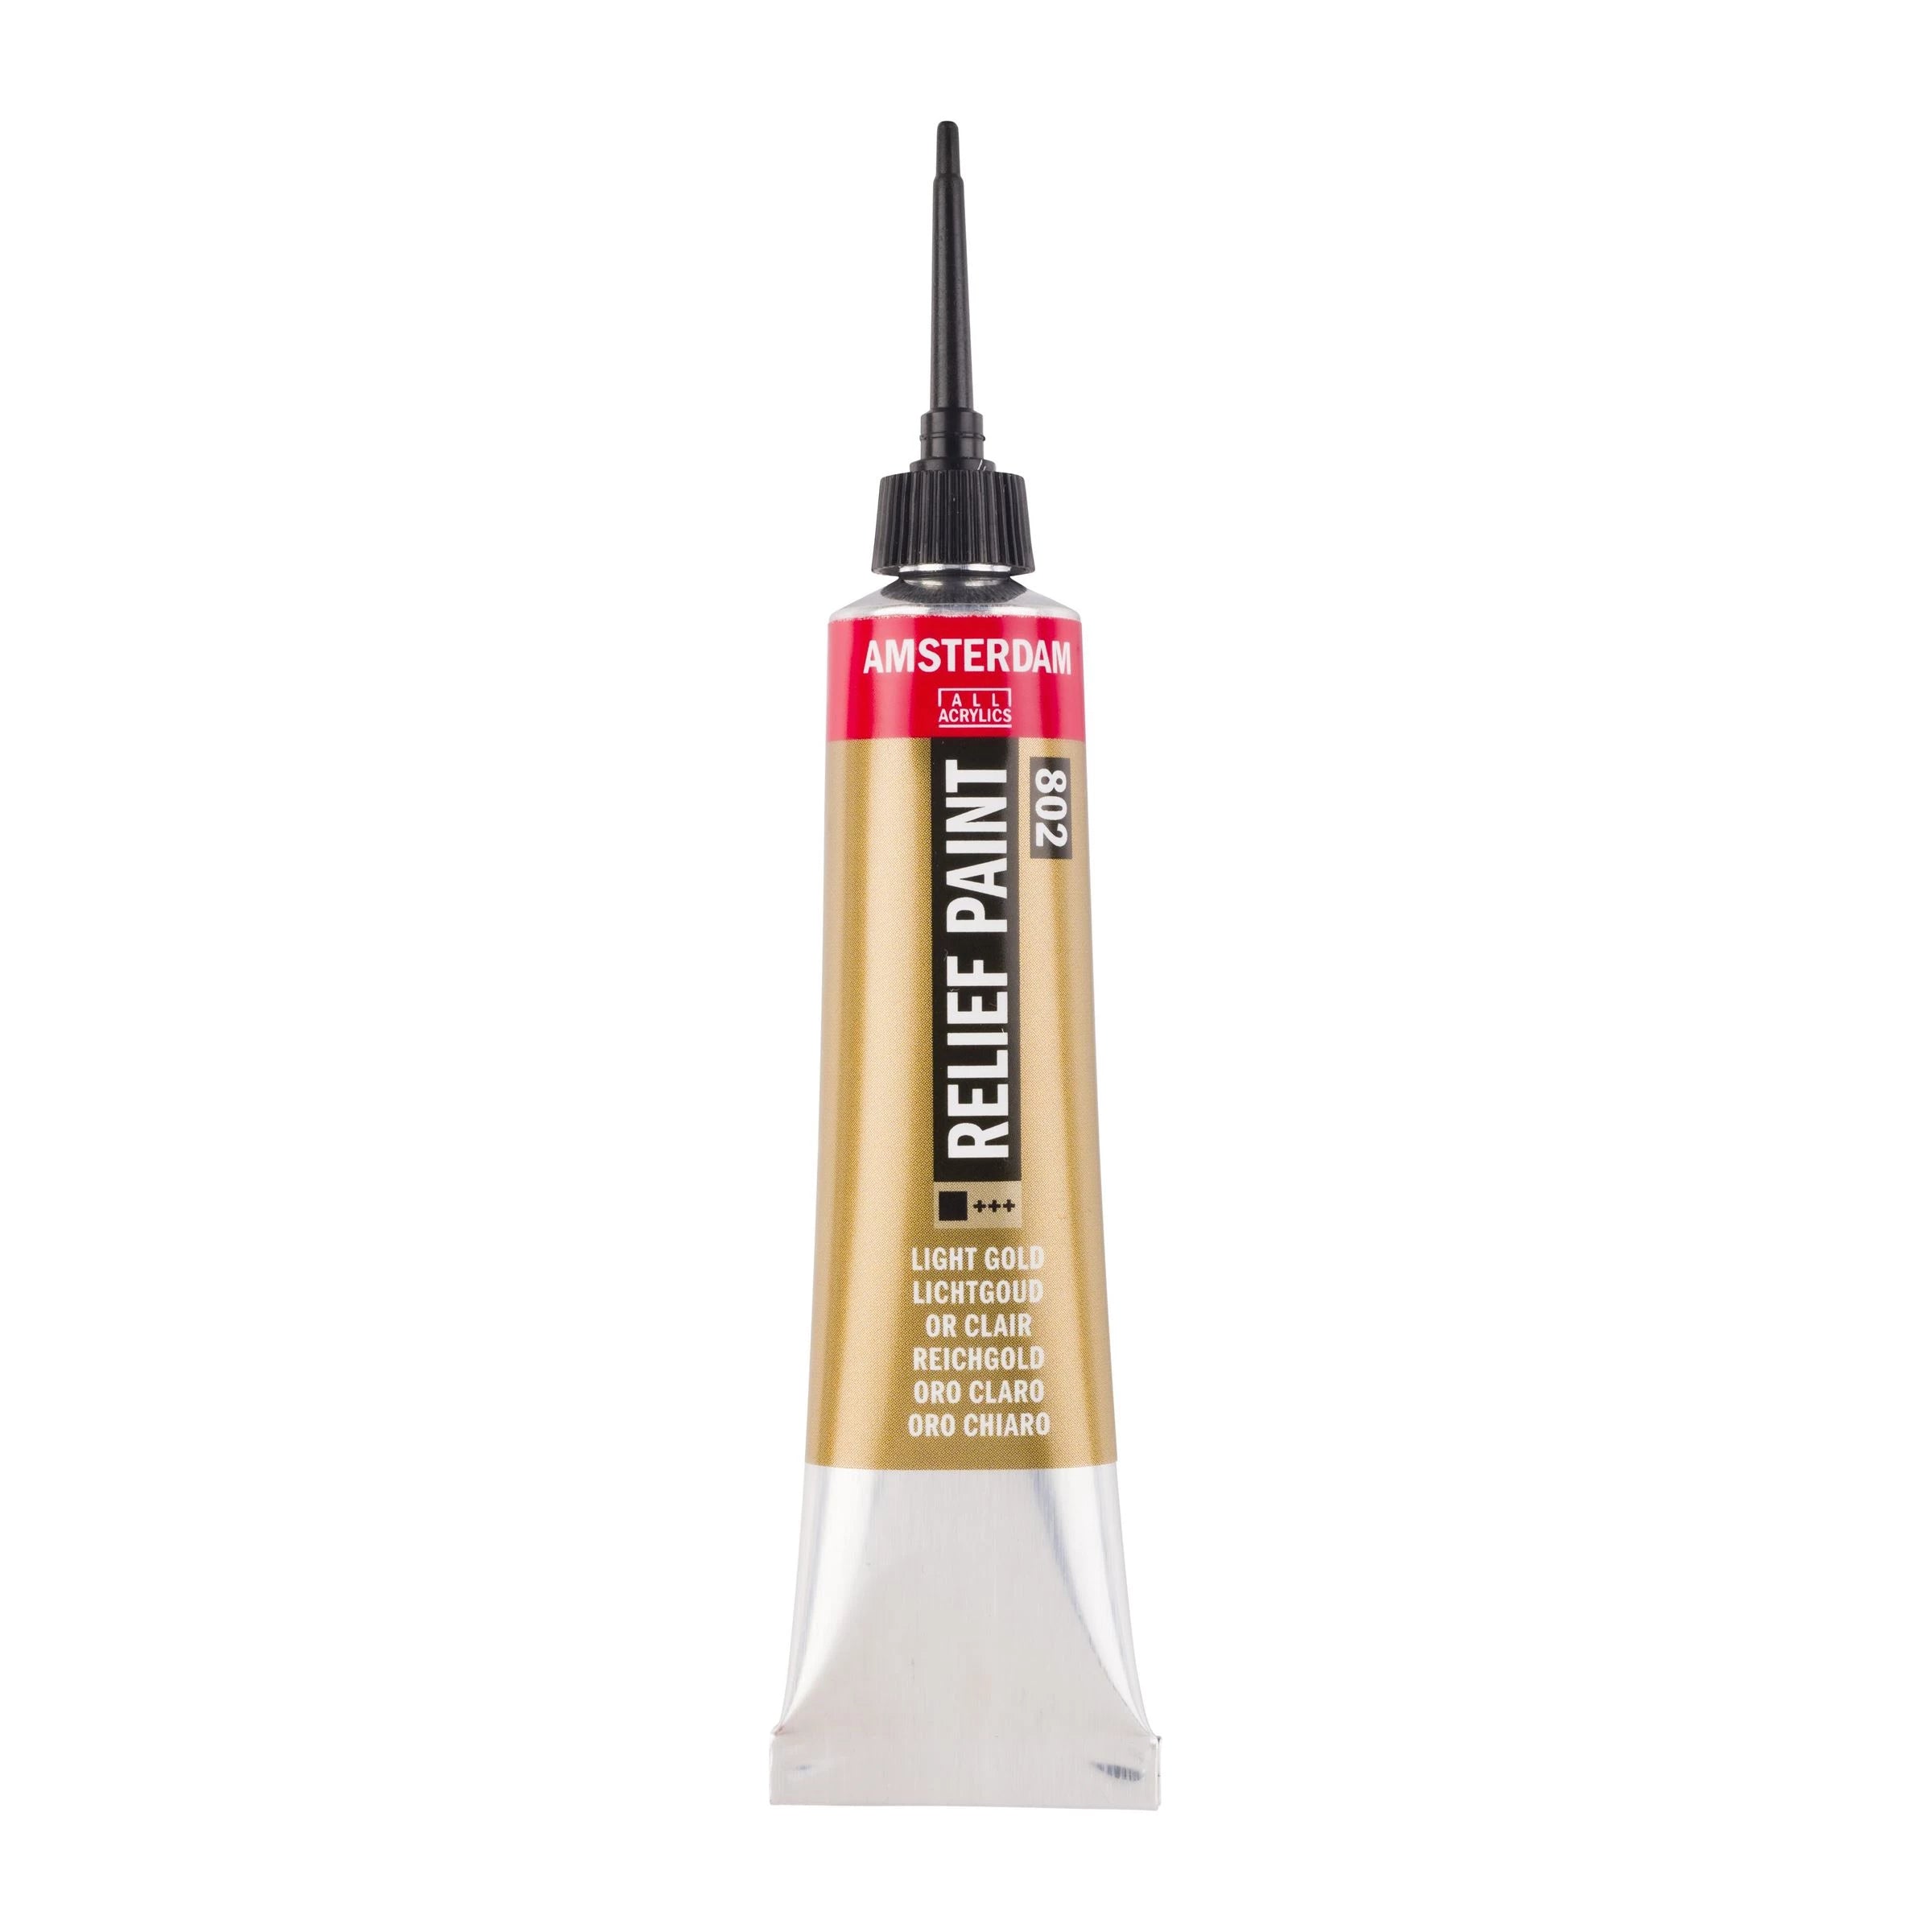 AMSTERDAM RELIEF PAINT - Light Gold